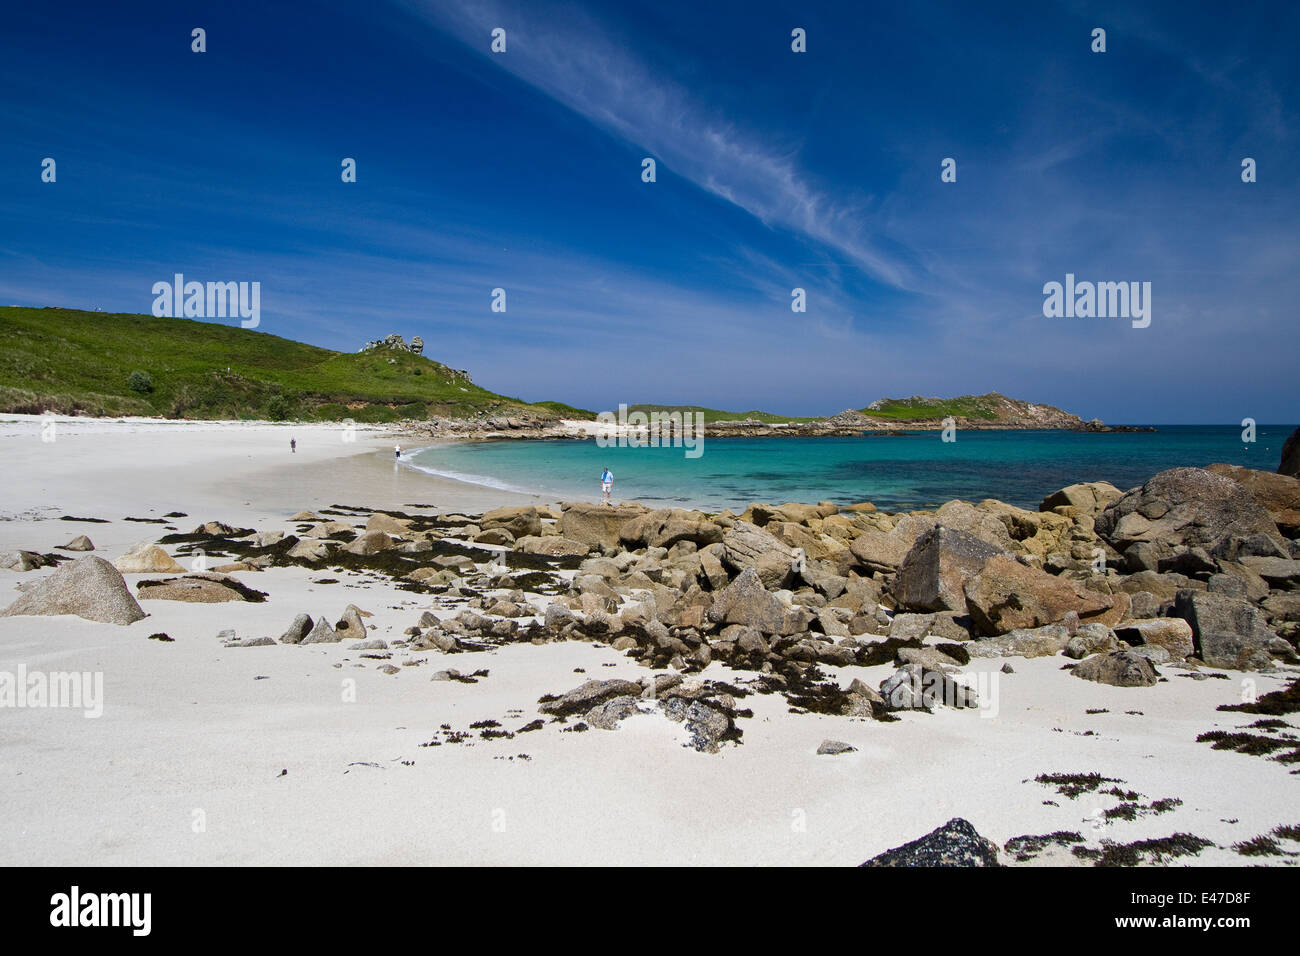 A view of Little Bay (St Martin's Bay) on the island of St Martin's, Isles of Scilly, UK. Stock Photo